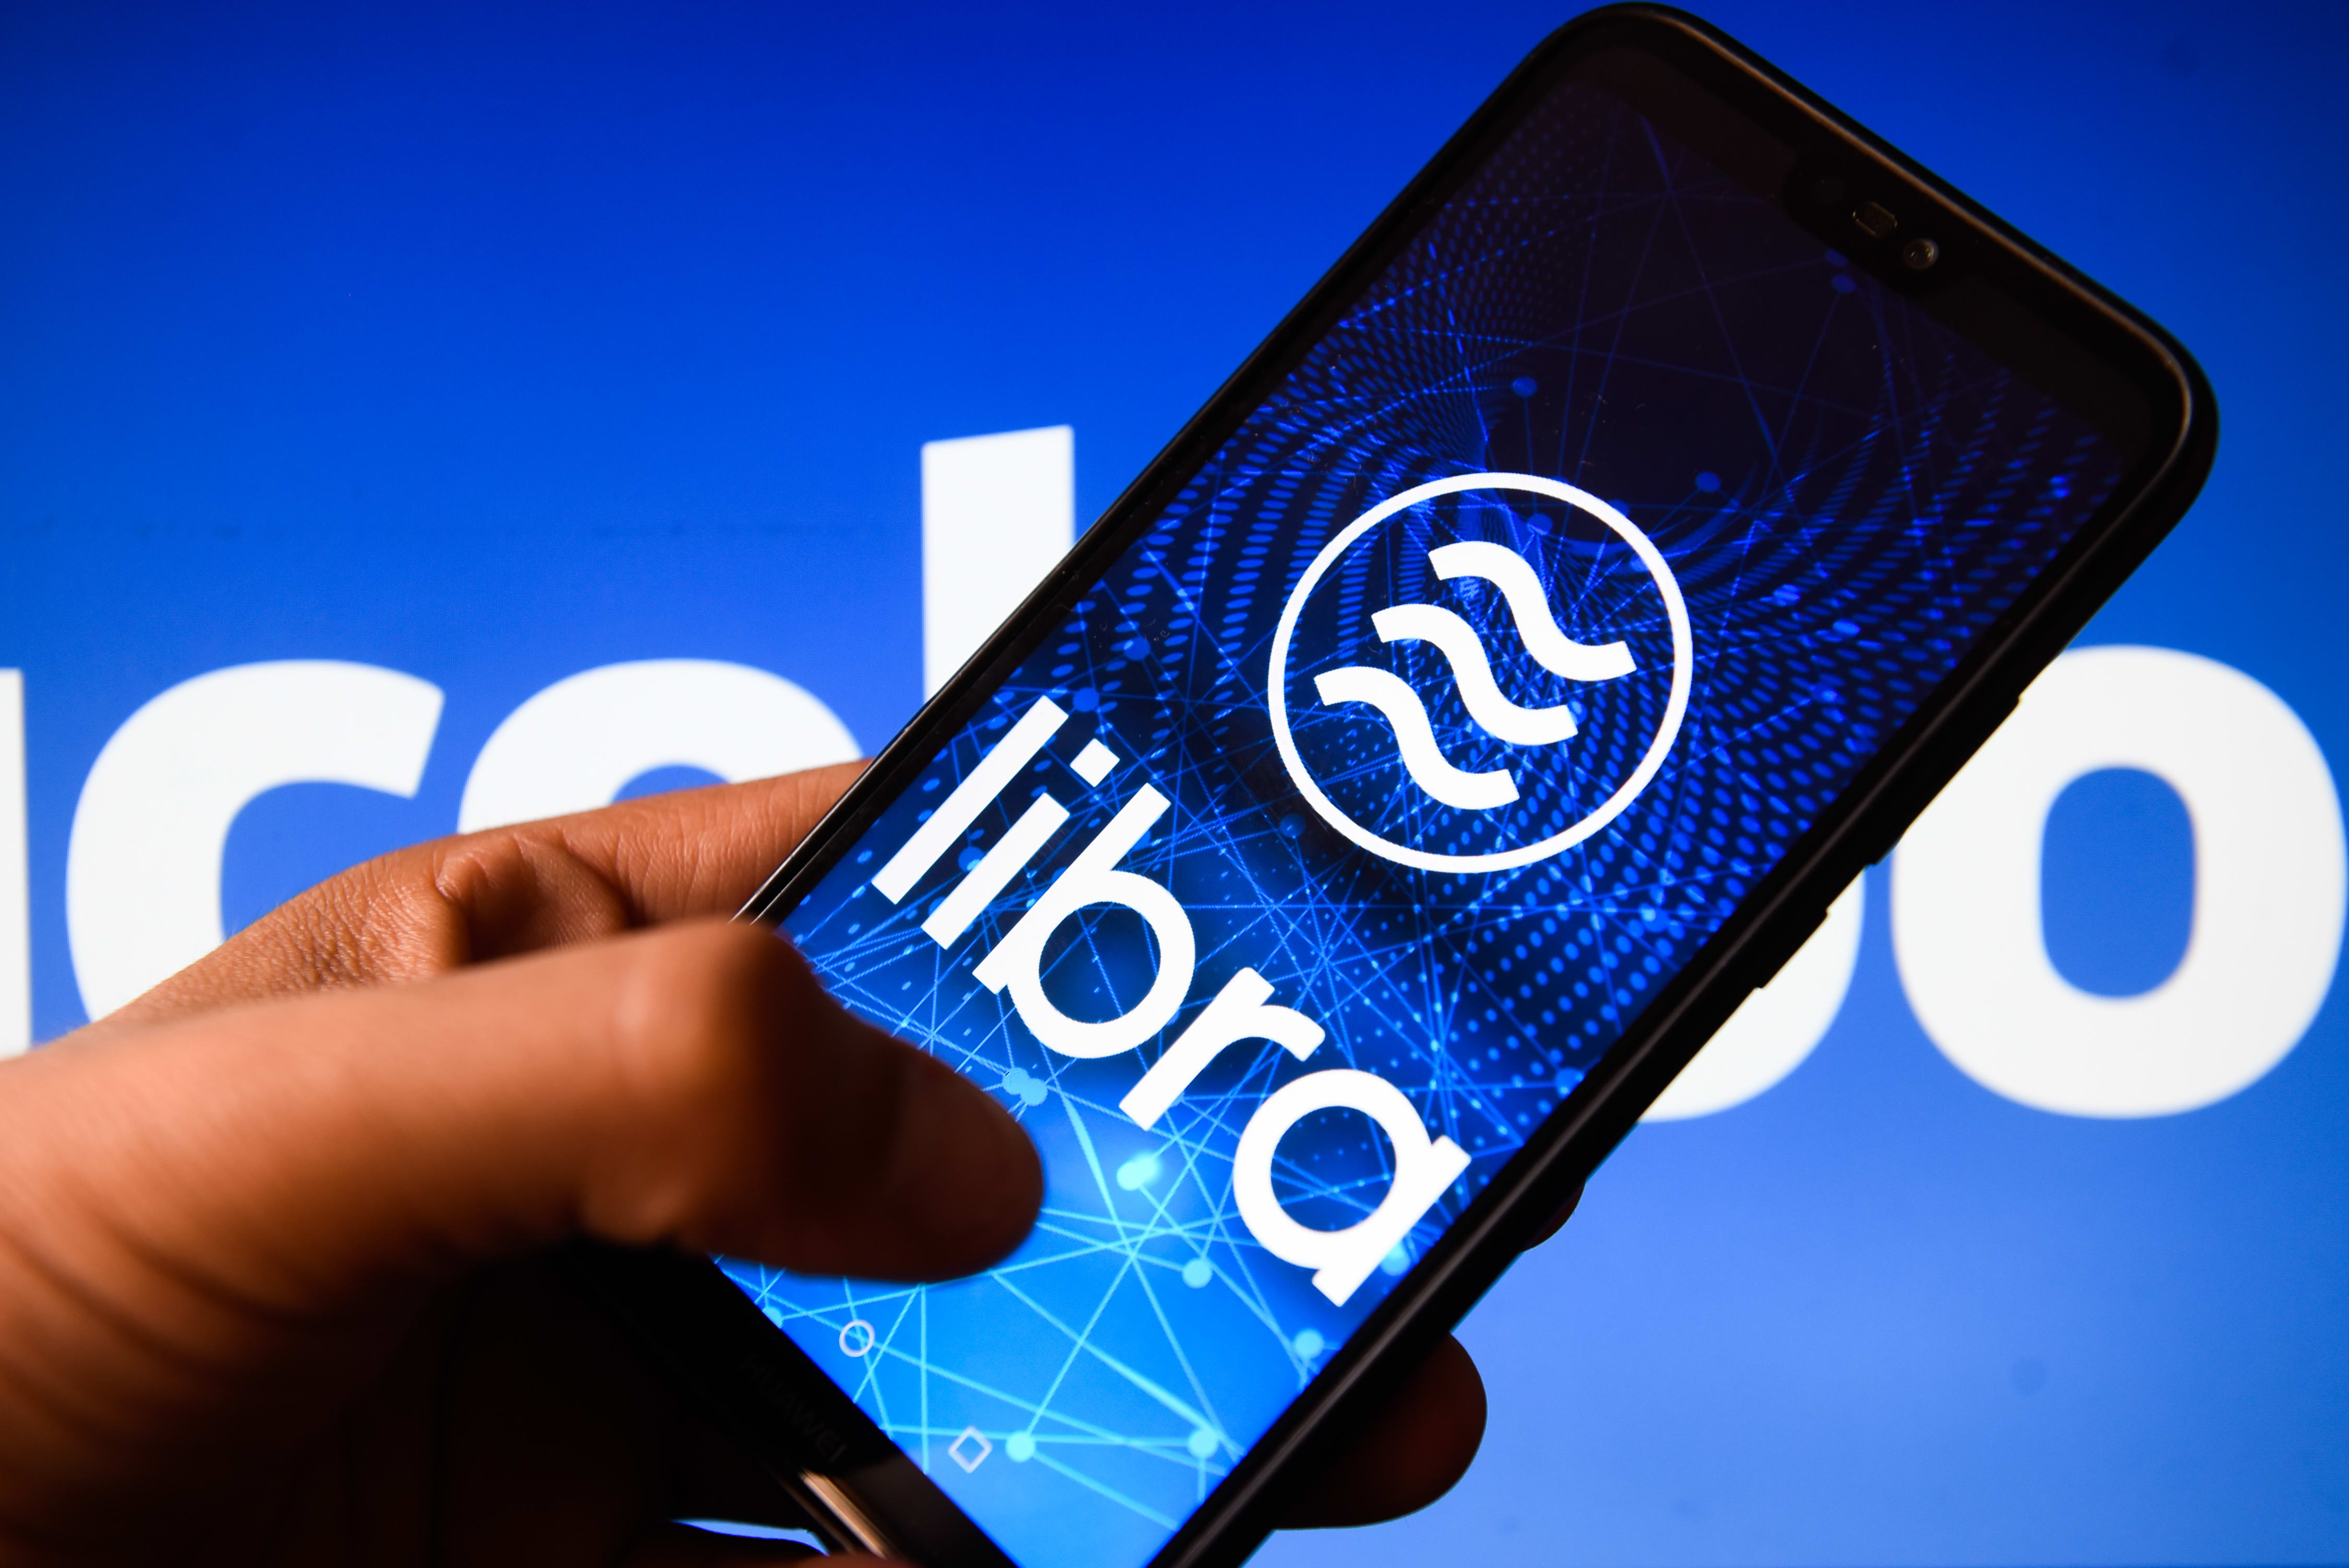 The EU is questioning Facebook about risks from libra cryptocurrency